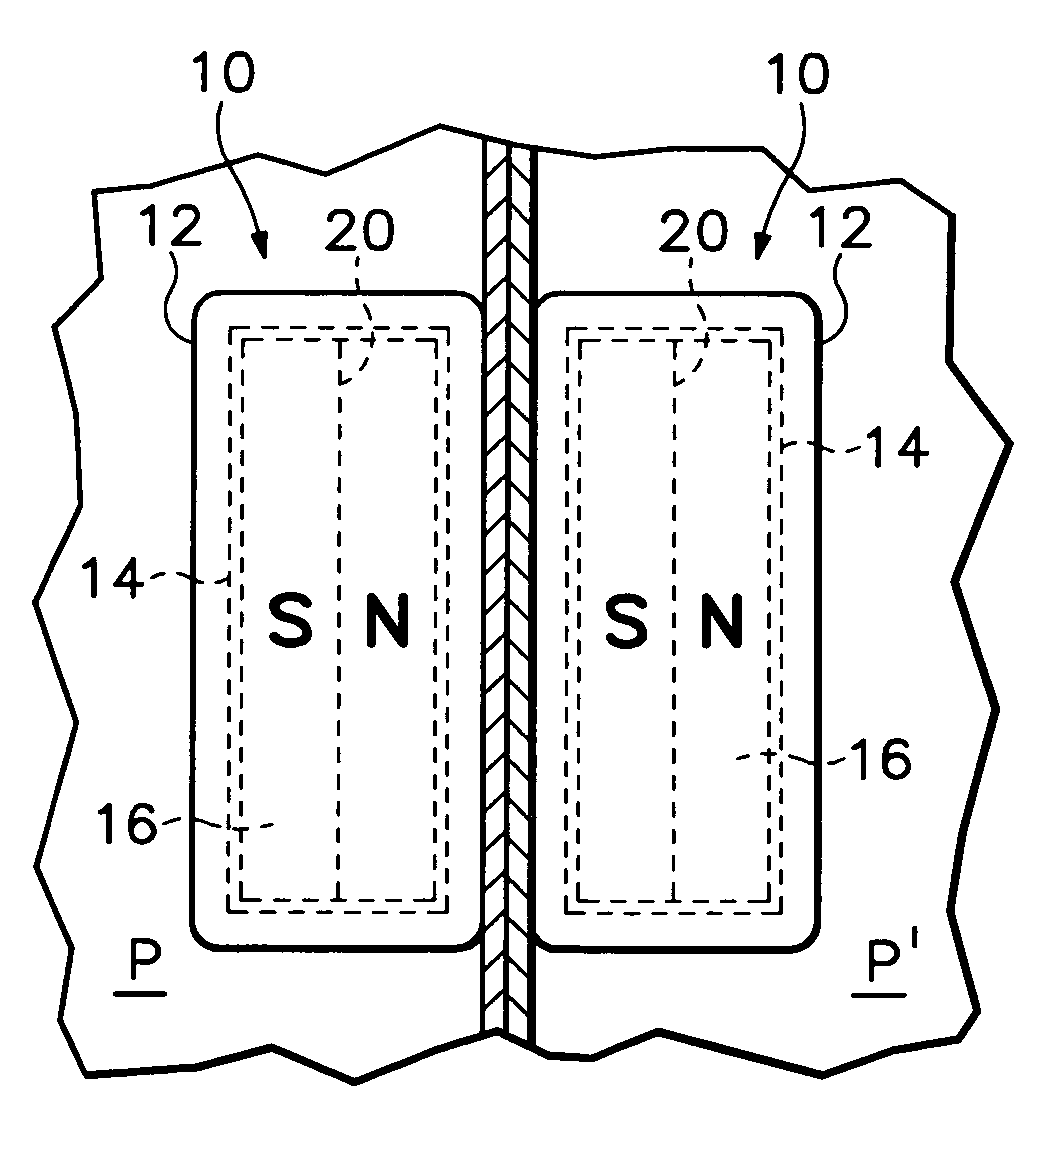 Magnetic connector apparatus